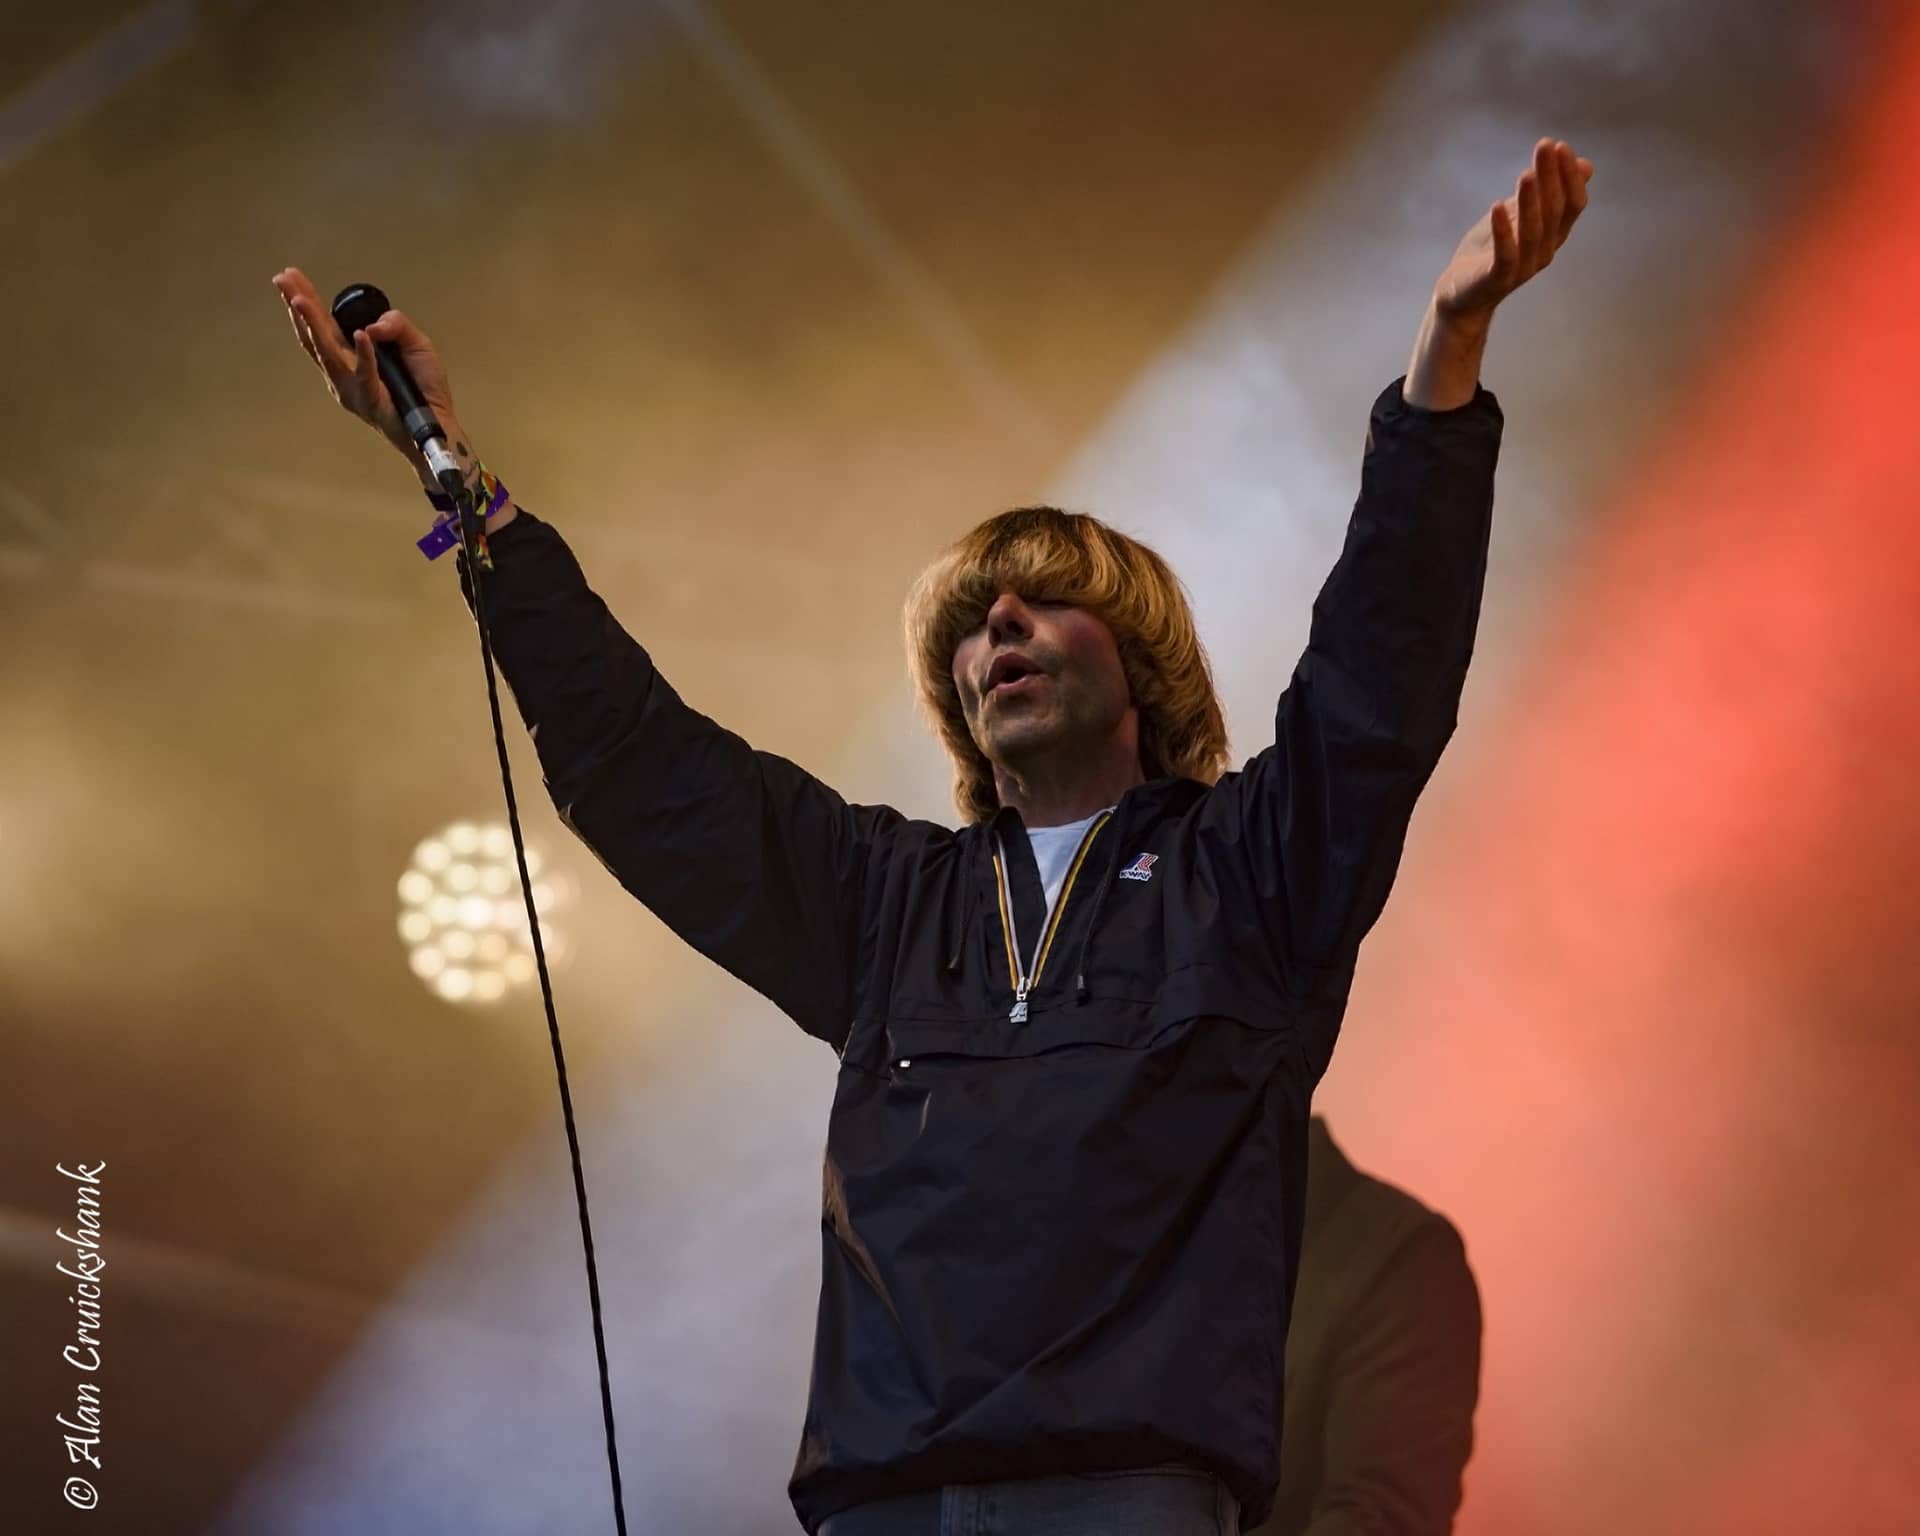 tVPZC - The Charlatans, Friday Belladrum 2018 - IMAGES